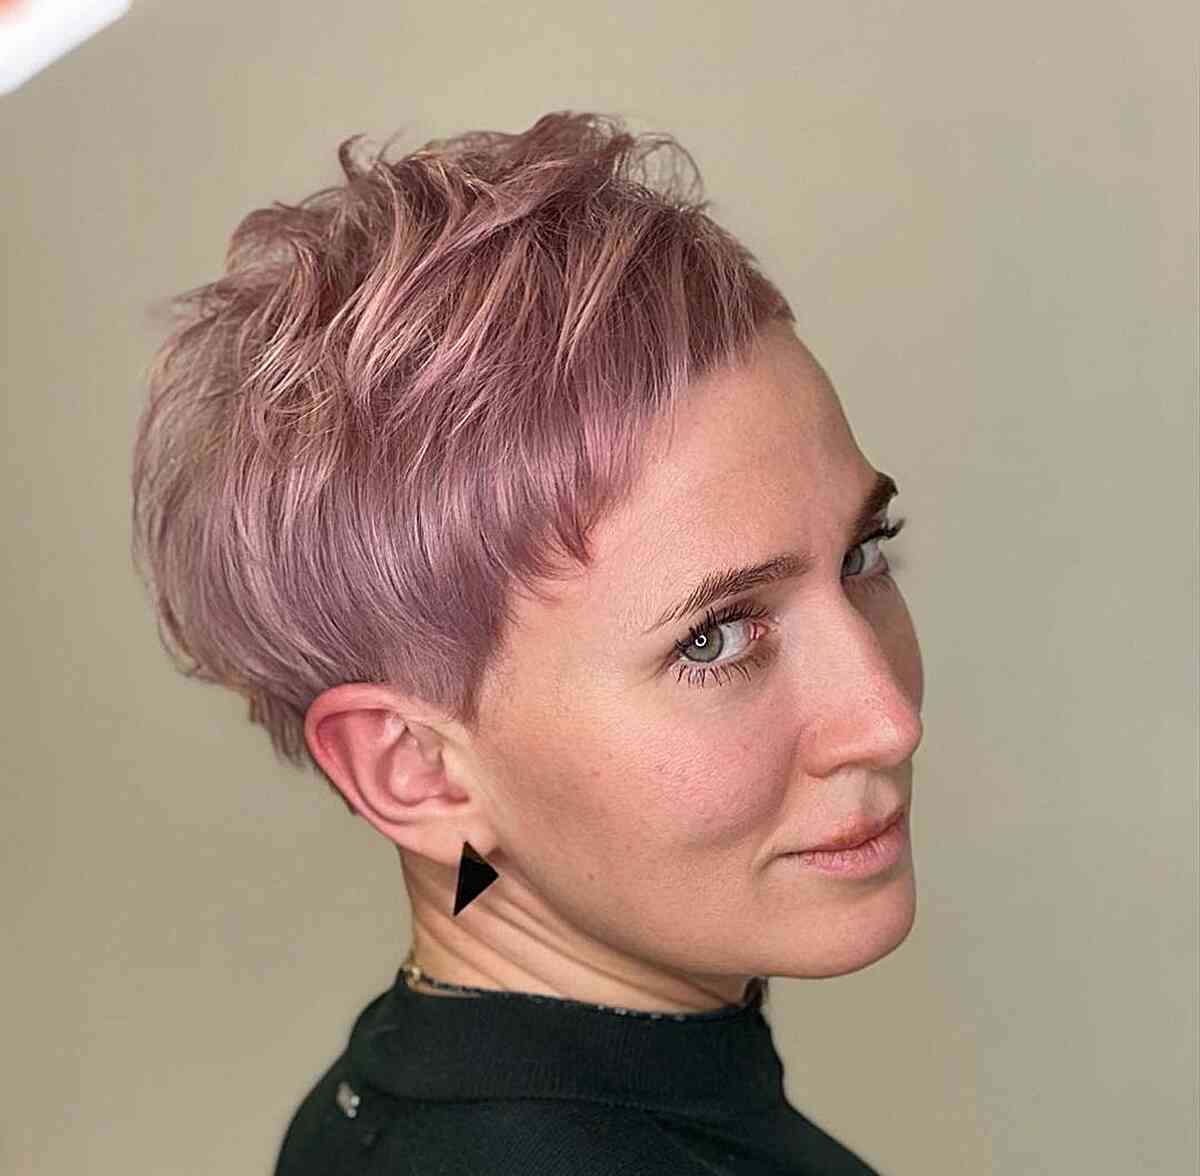 Metallic Pink Choppy Pixie Cut with very short fringe for women